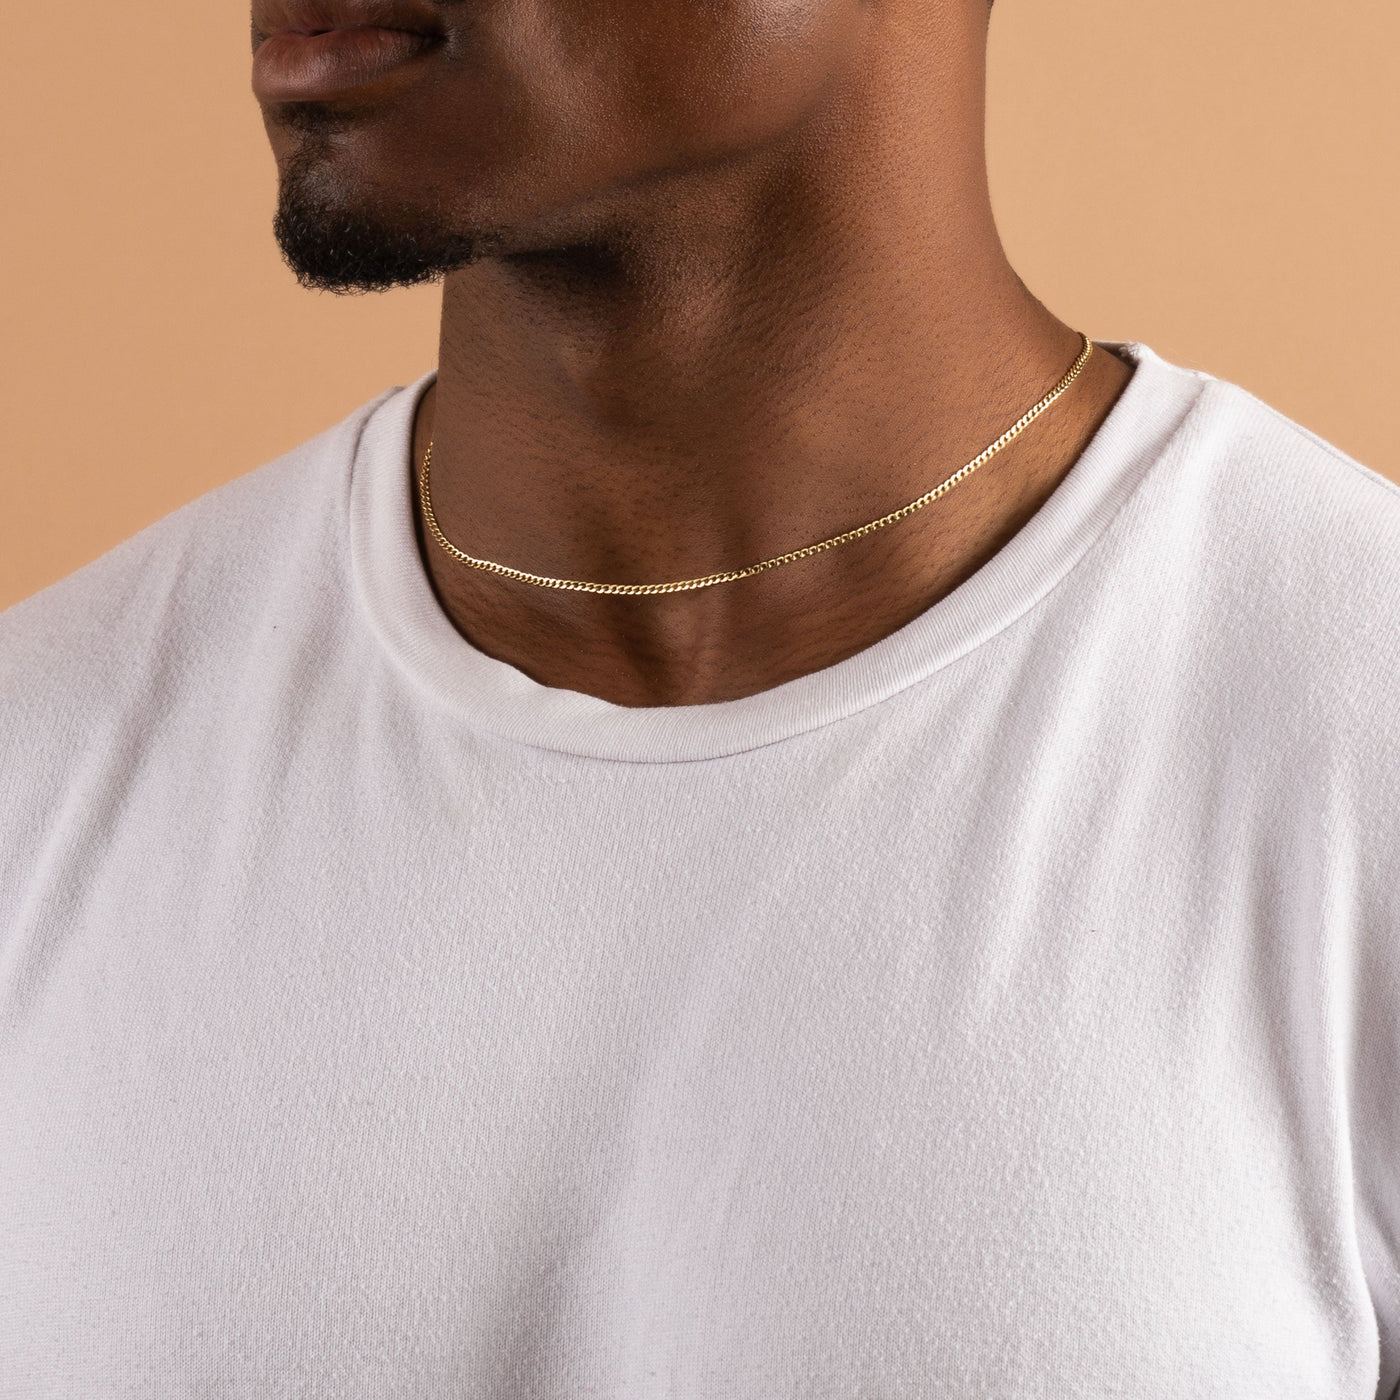 Mens Thin 14K Curb Chain Necklace